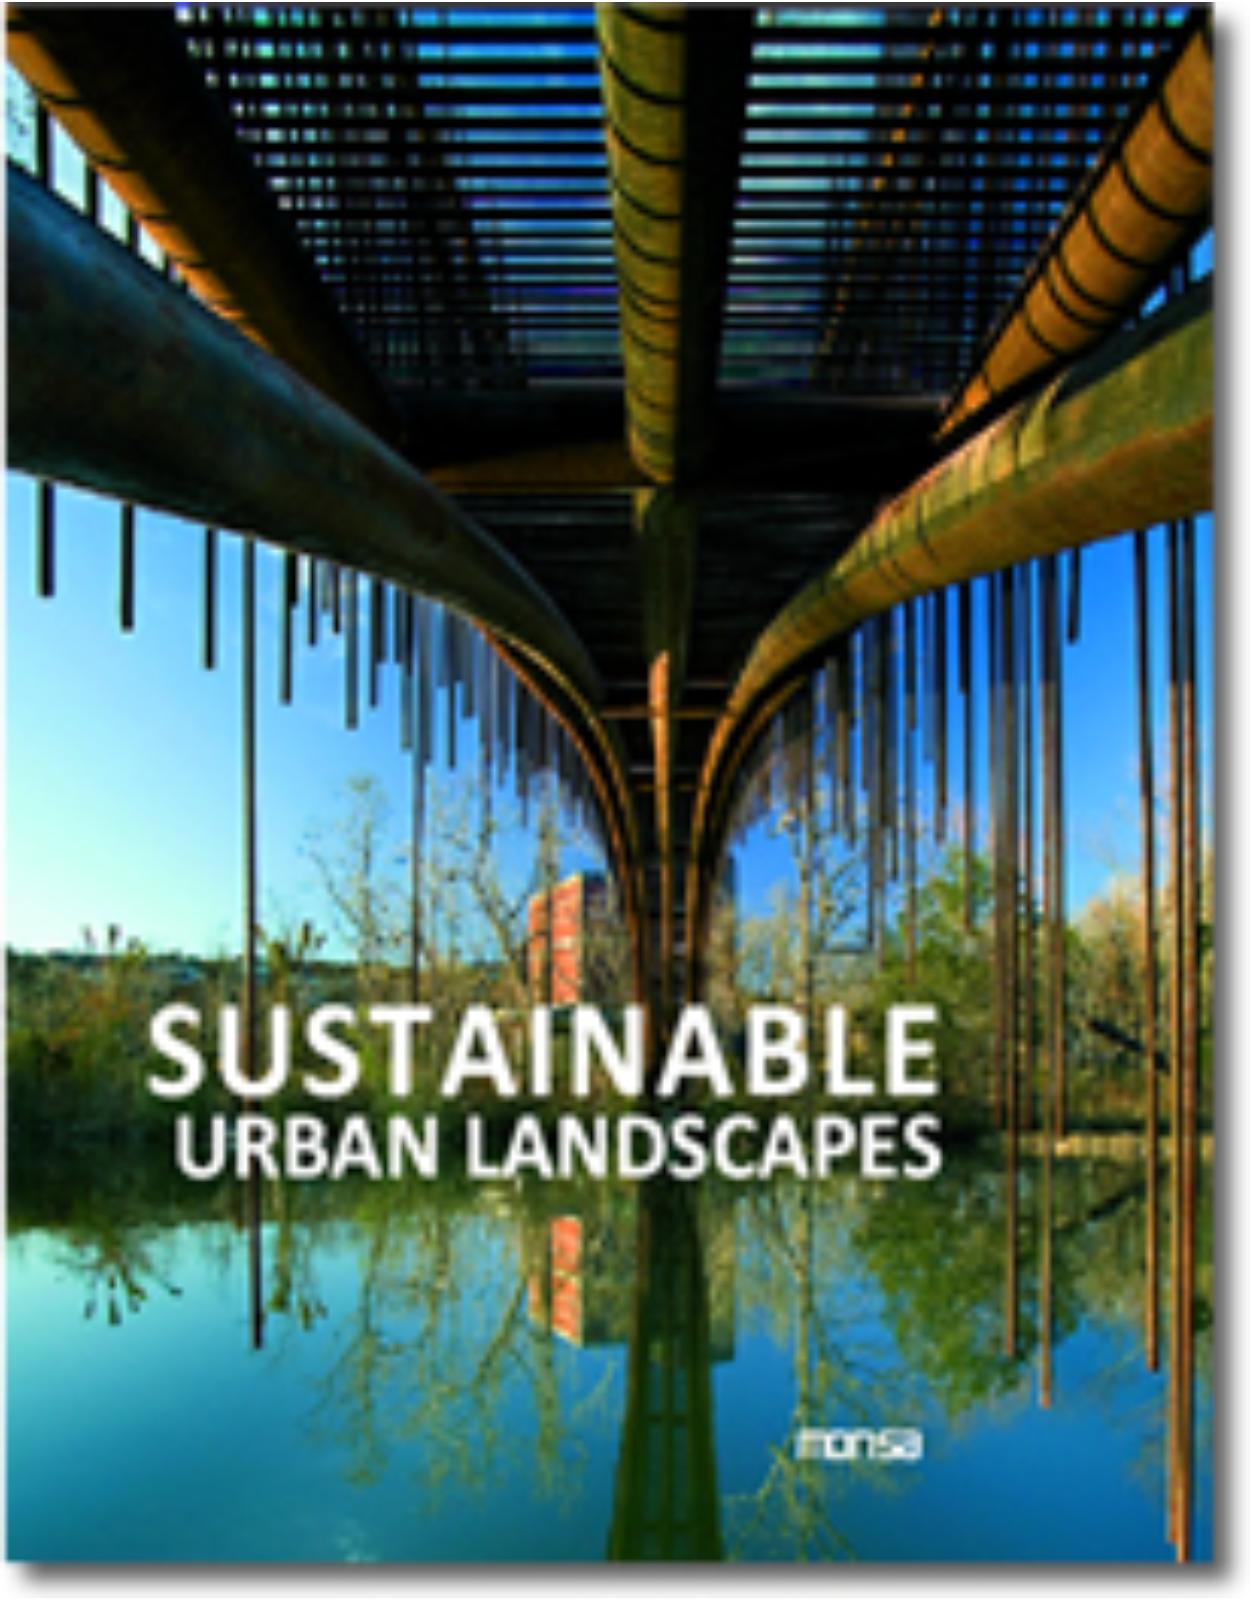 Sustainable urban landscapes